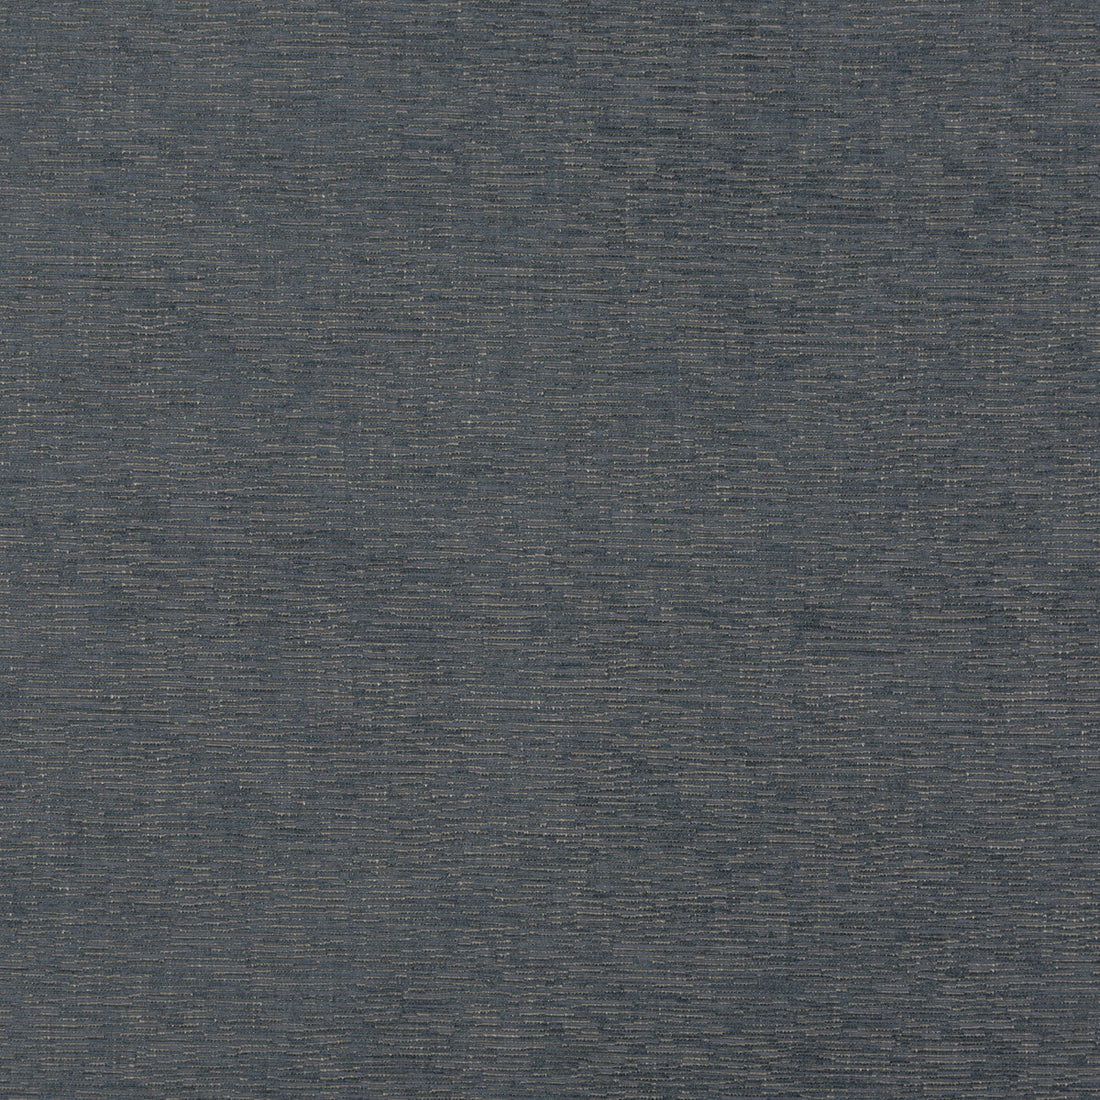 Tides fabric in indigo color - pattern BF10683.680.0 - by G P &amp; J Baker in the Essential Colours collection